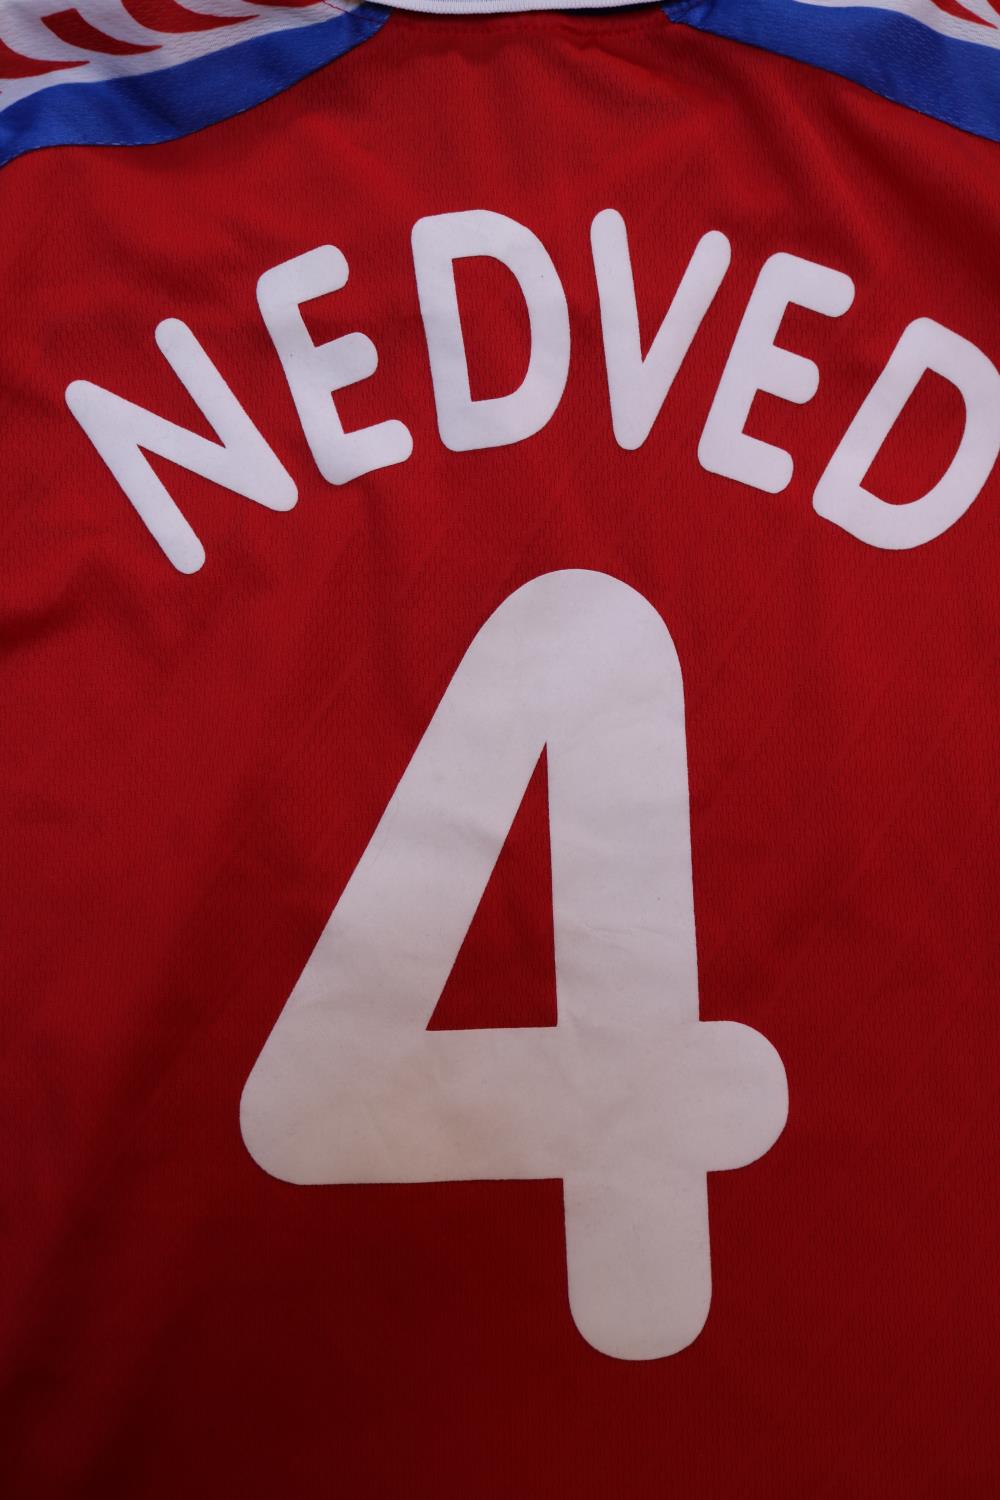 PAVEL NEDVED 1996 MATCH WORN CZECH REPUBLIC JERSEY The Puma red #4 jersey was worn by the Czech - Image 7 of 7